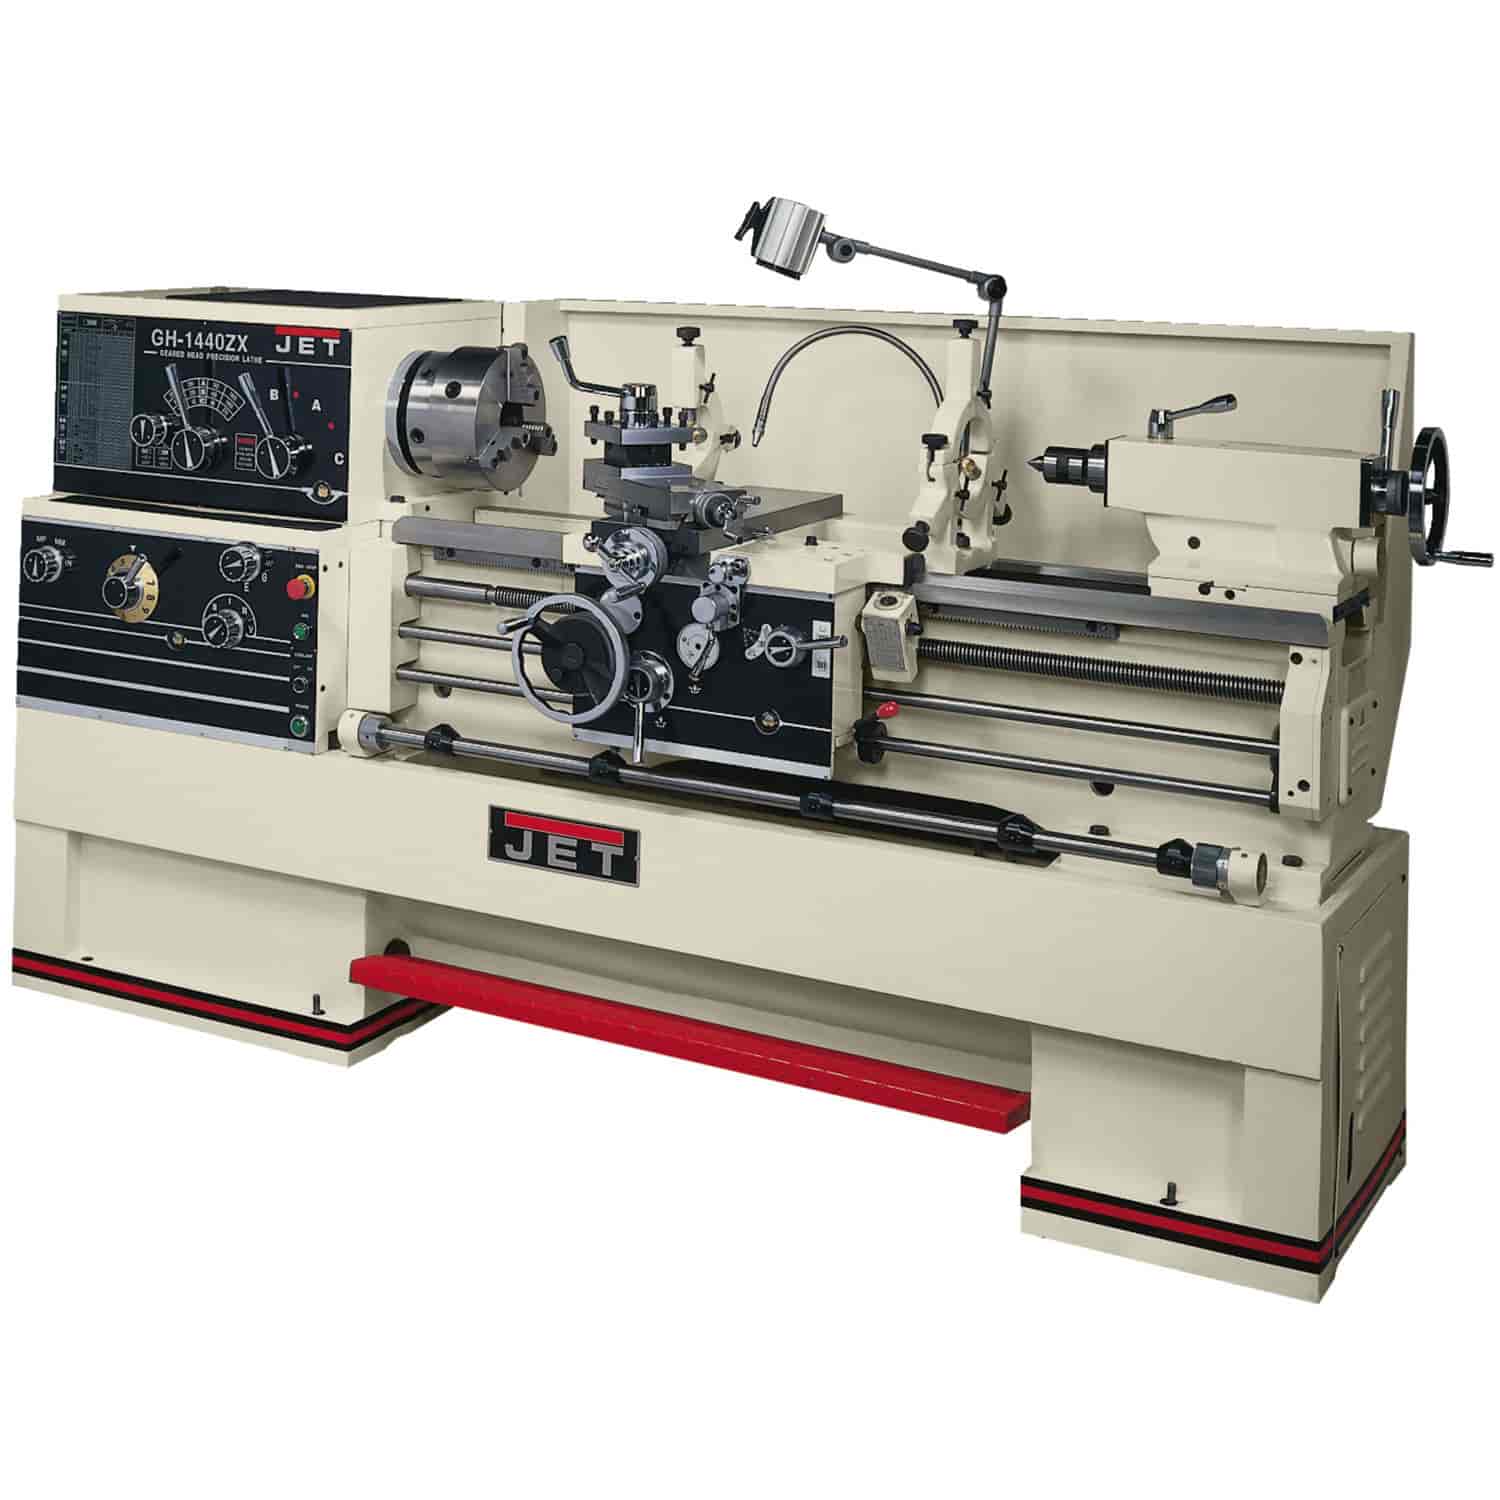 GH-1440ZX 3-1/8 Spindle Bore Geared Head Lathe